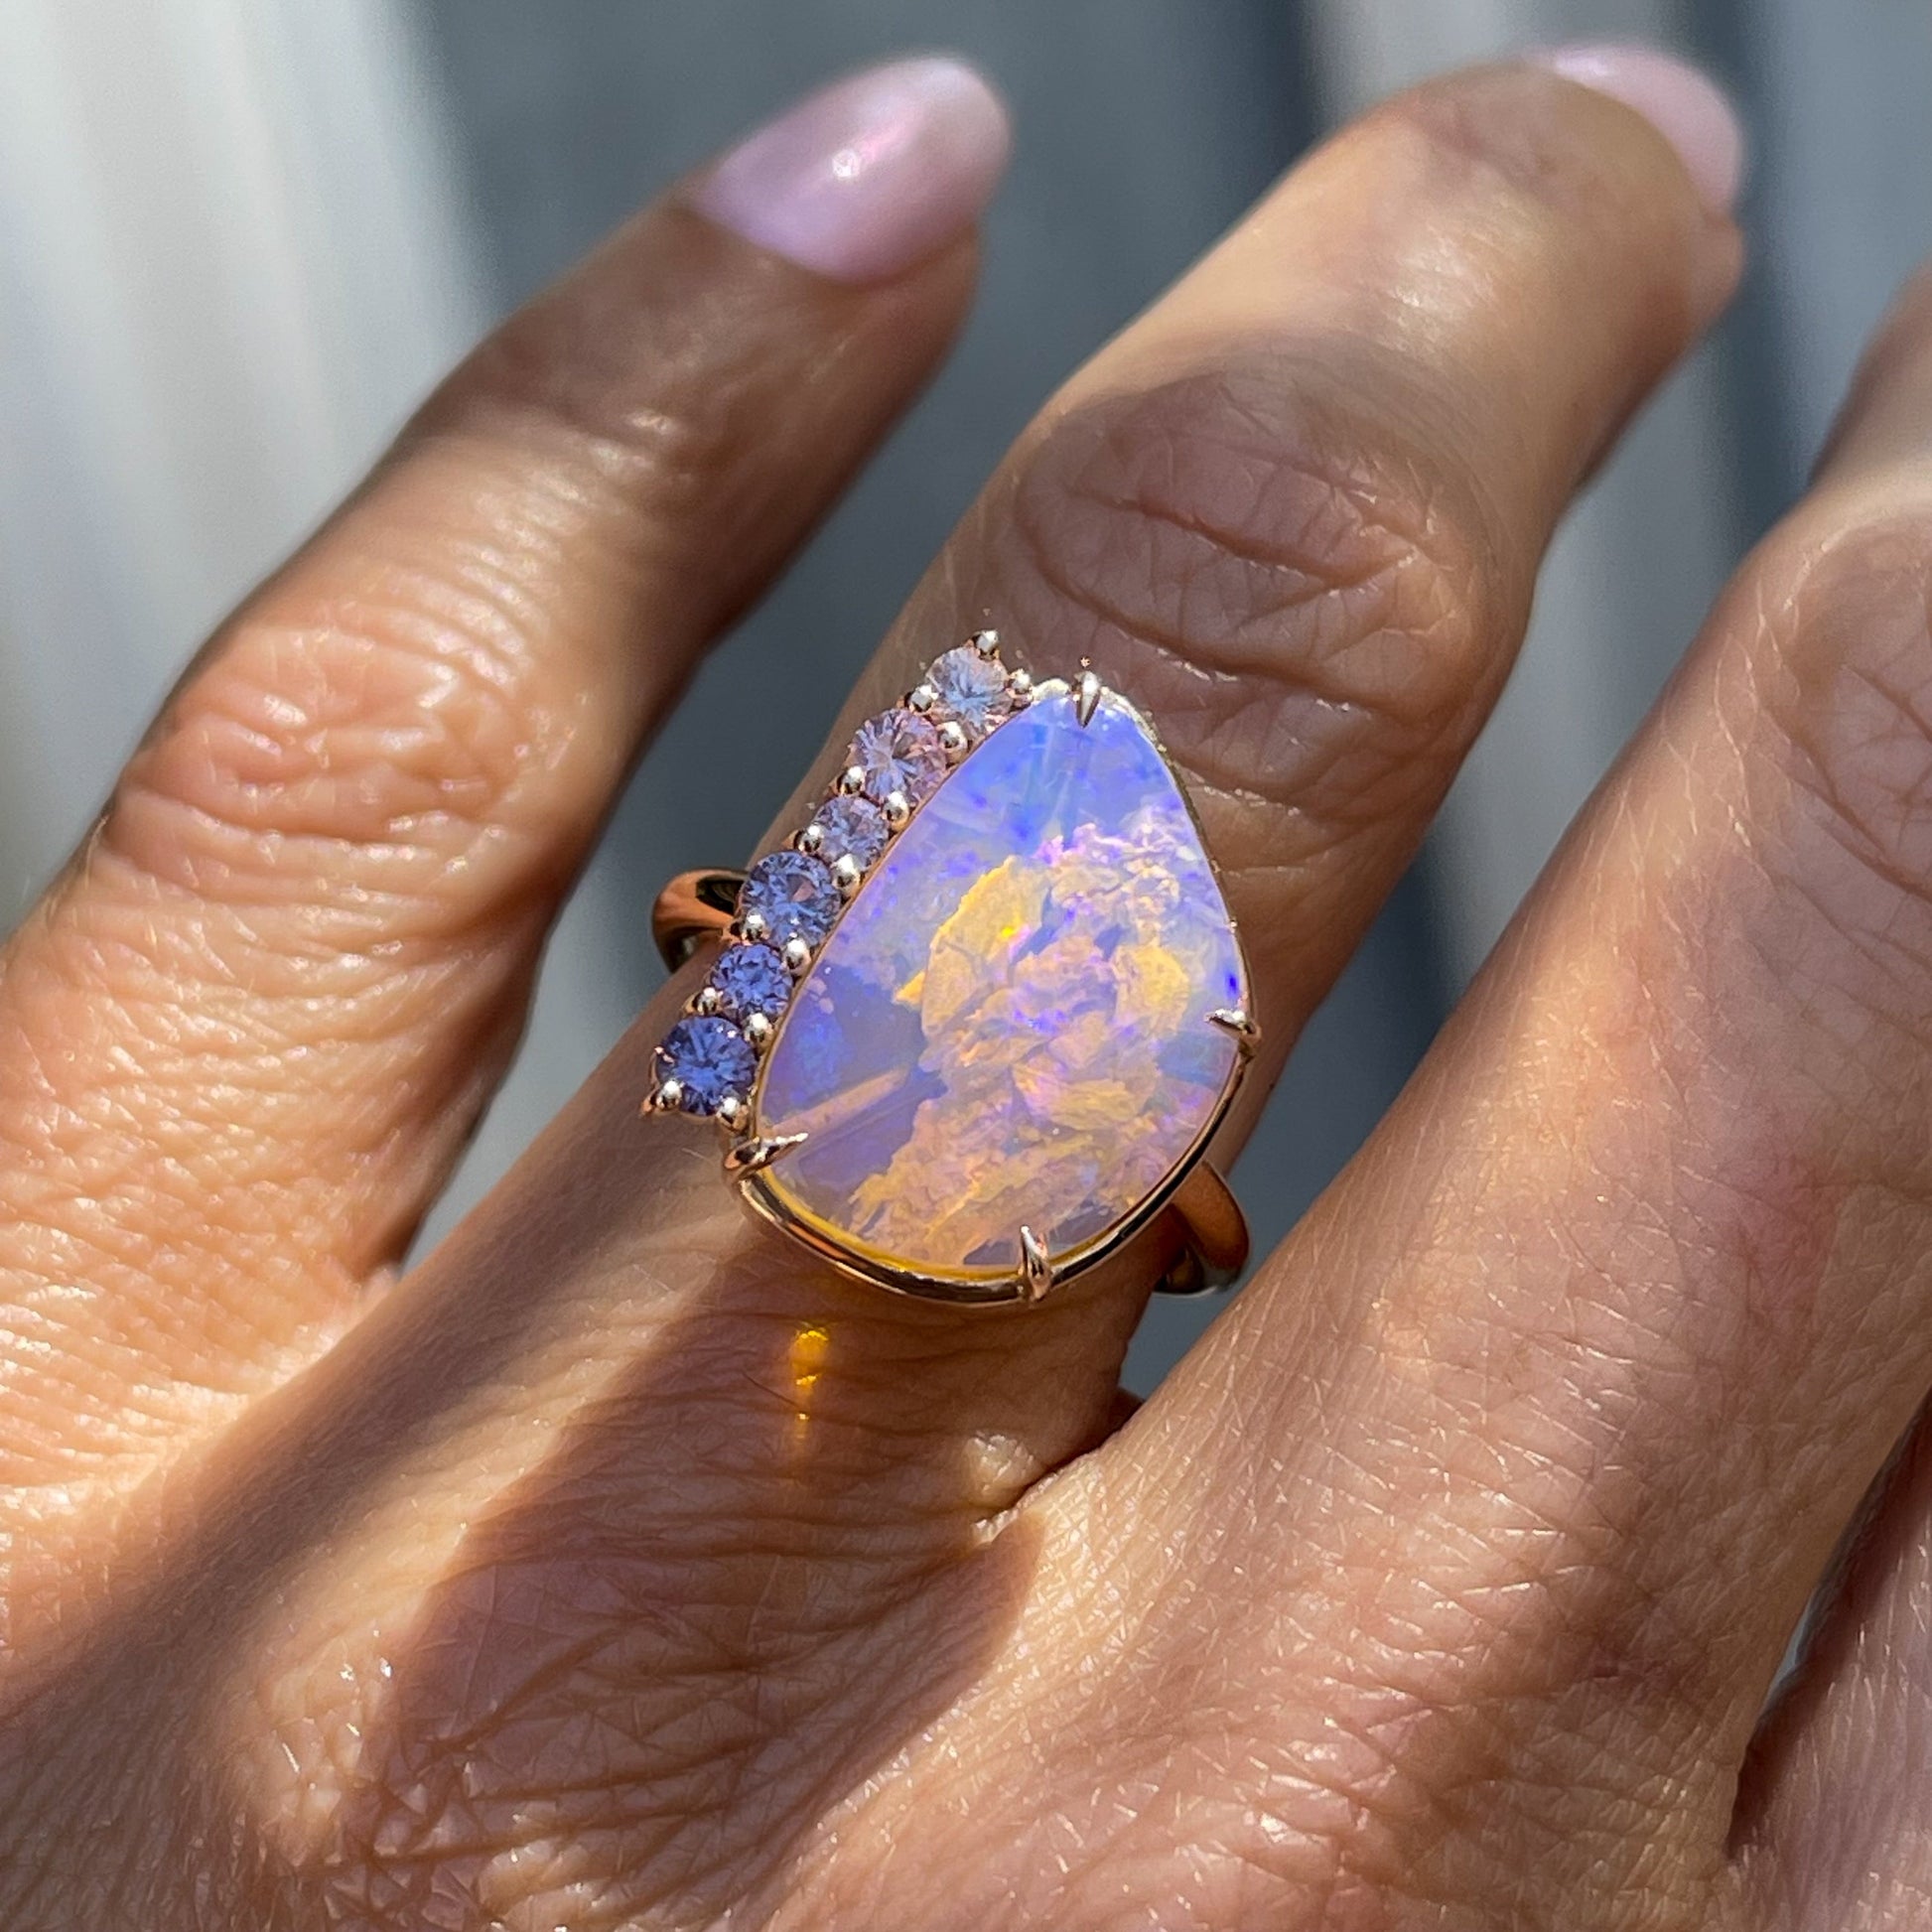 An Australian Opal Ring by NIXIN Jewelry modeled on a hand. One of the opal rings for sale on NIXINJewelry.com, this ring has an opal stone bordered by pink and purple sapphires.